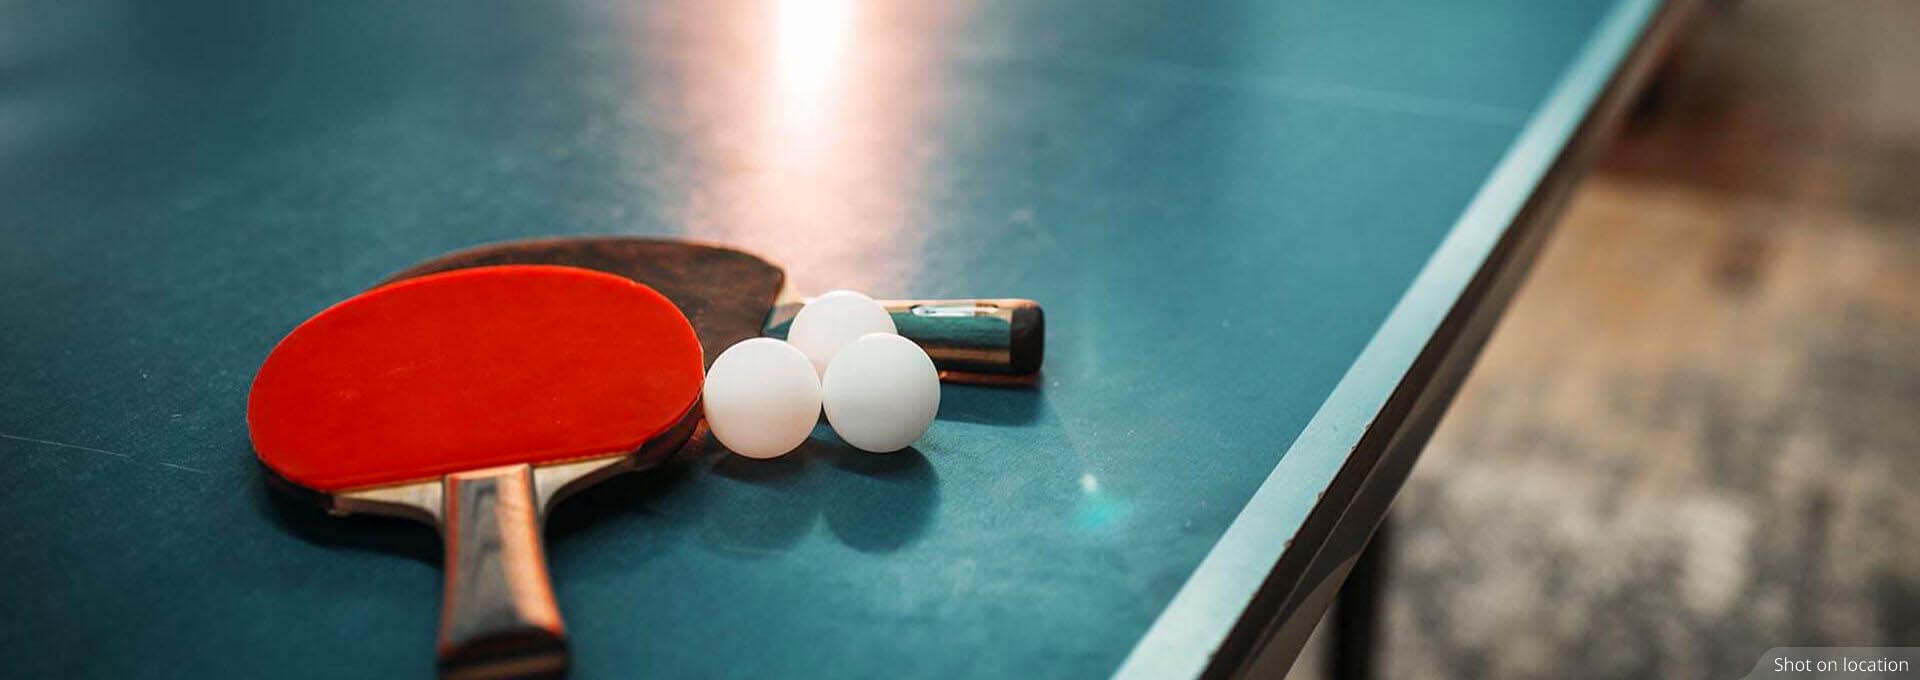 Table tennis court in Chancery by House of Hiranandani in Devanahalli, Bengaluru